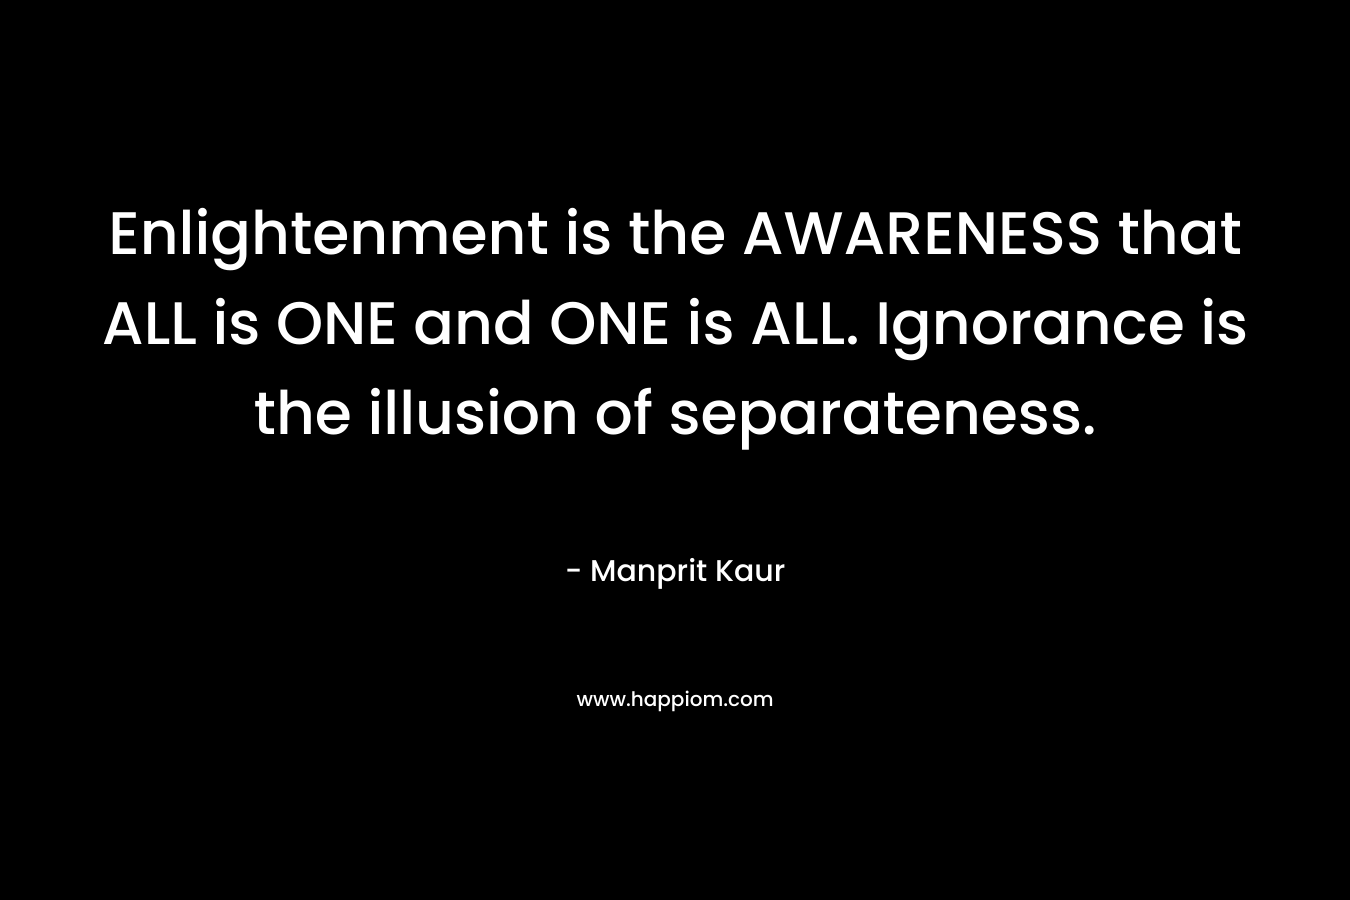 Enlightenment is the AWARENESS that ALL is ONE and ONE is ALL. Ignorance is the illusion of separateness.